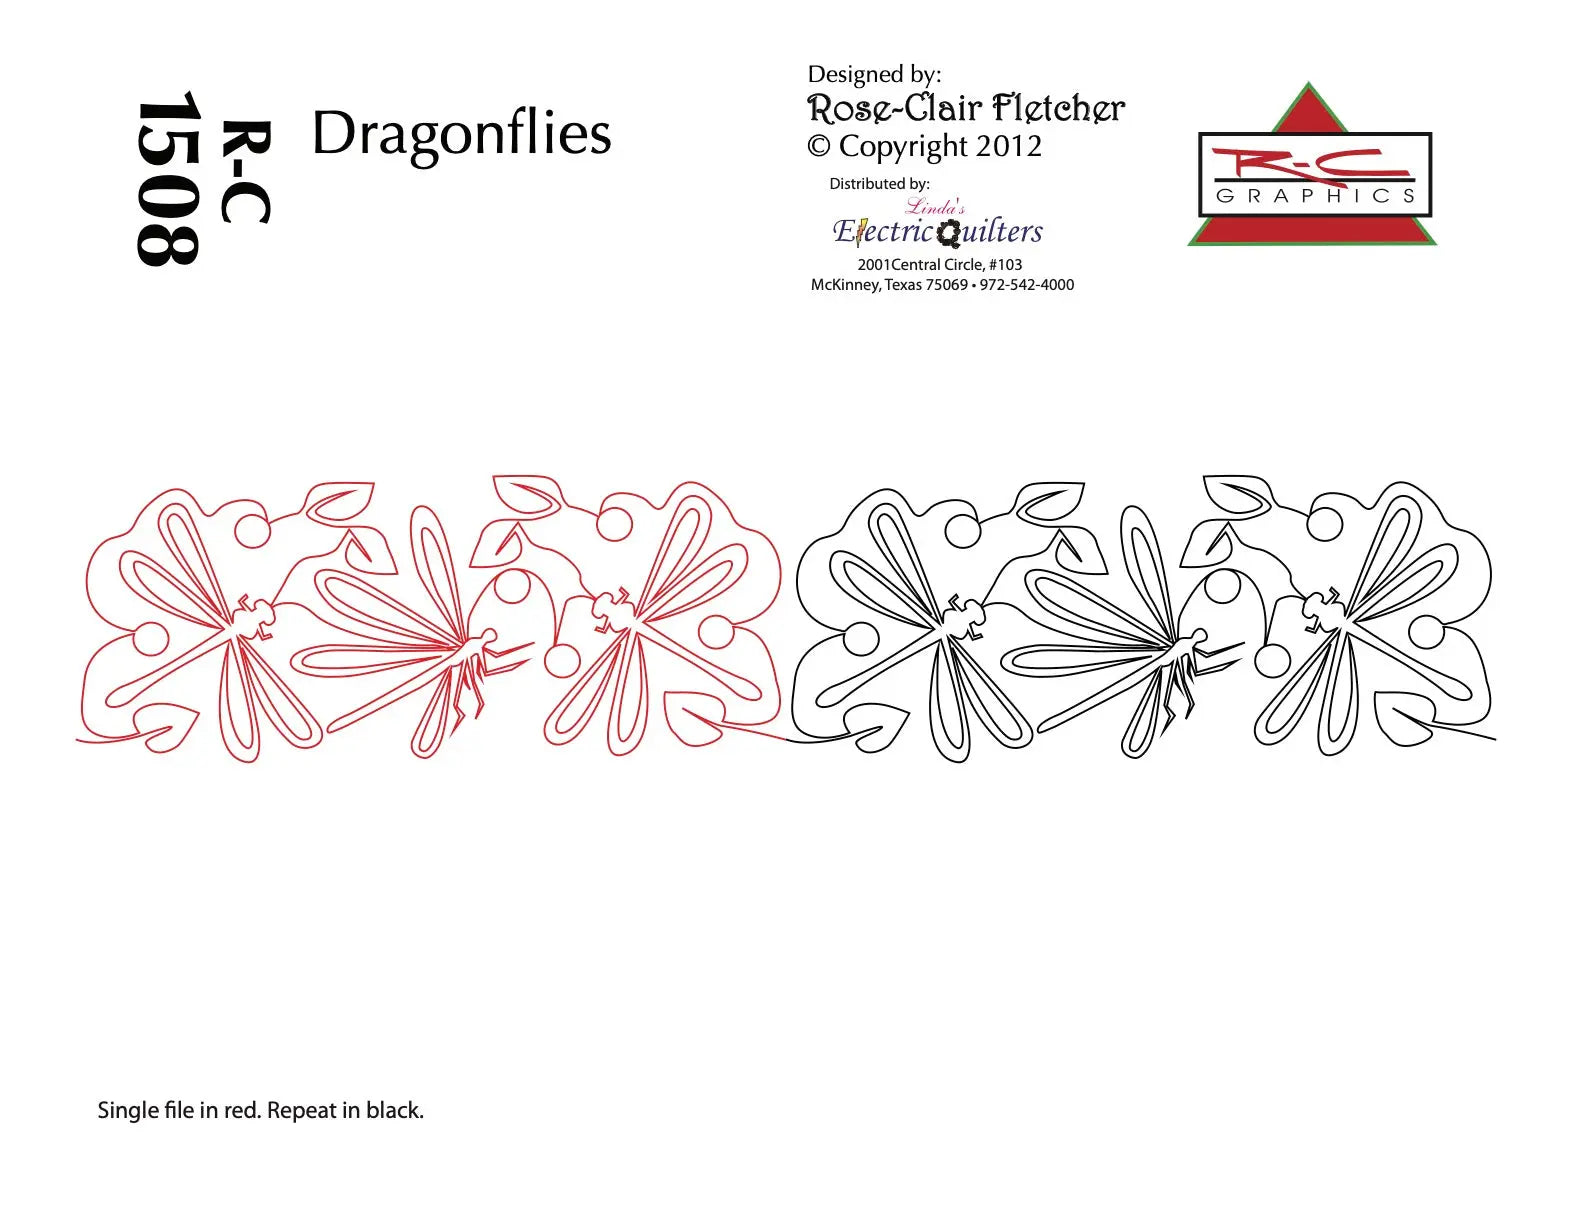 1508 Dragonflies Pantograph by Rose-Clair Fletcher - Linda's Electric Quilters